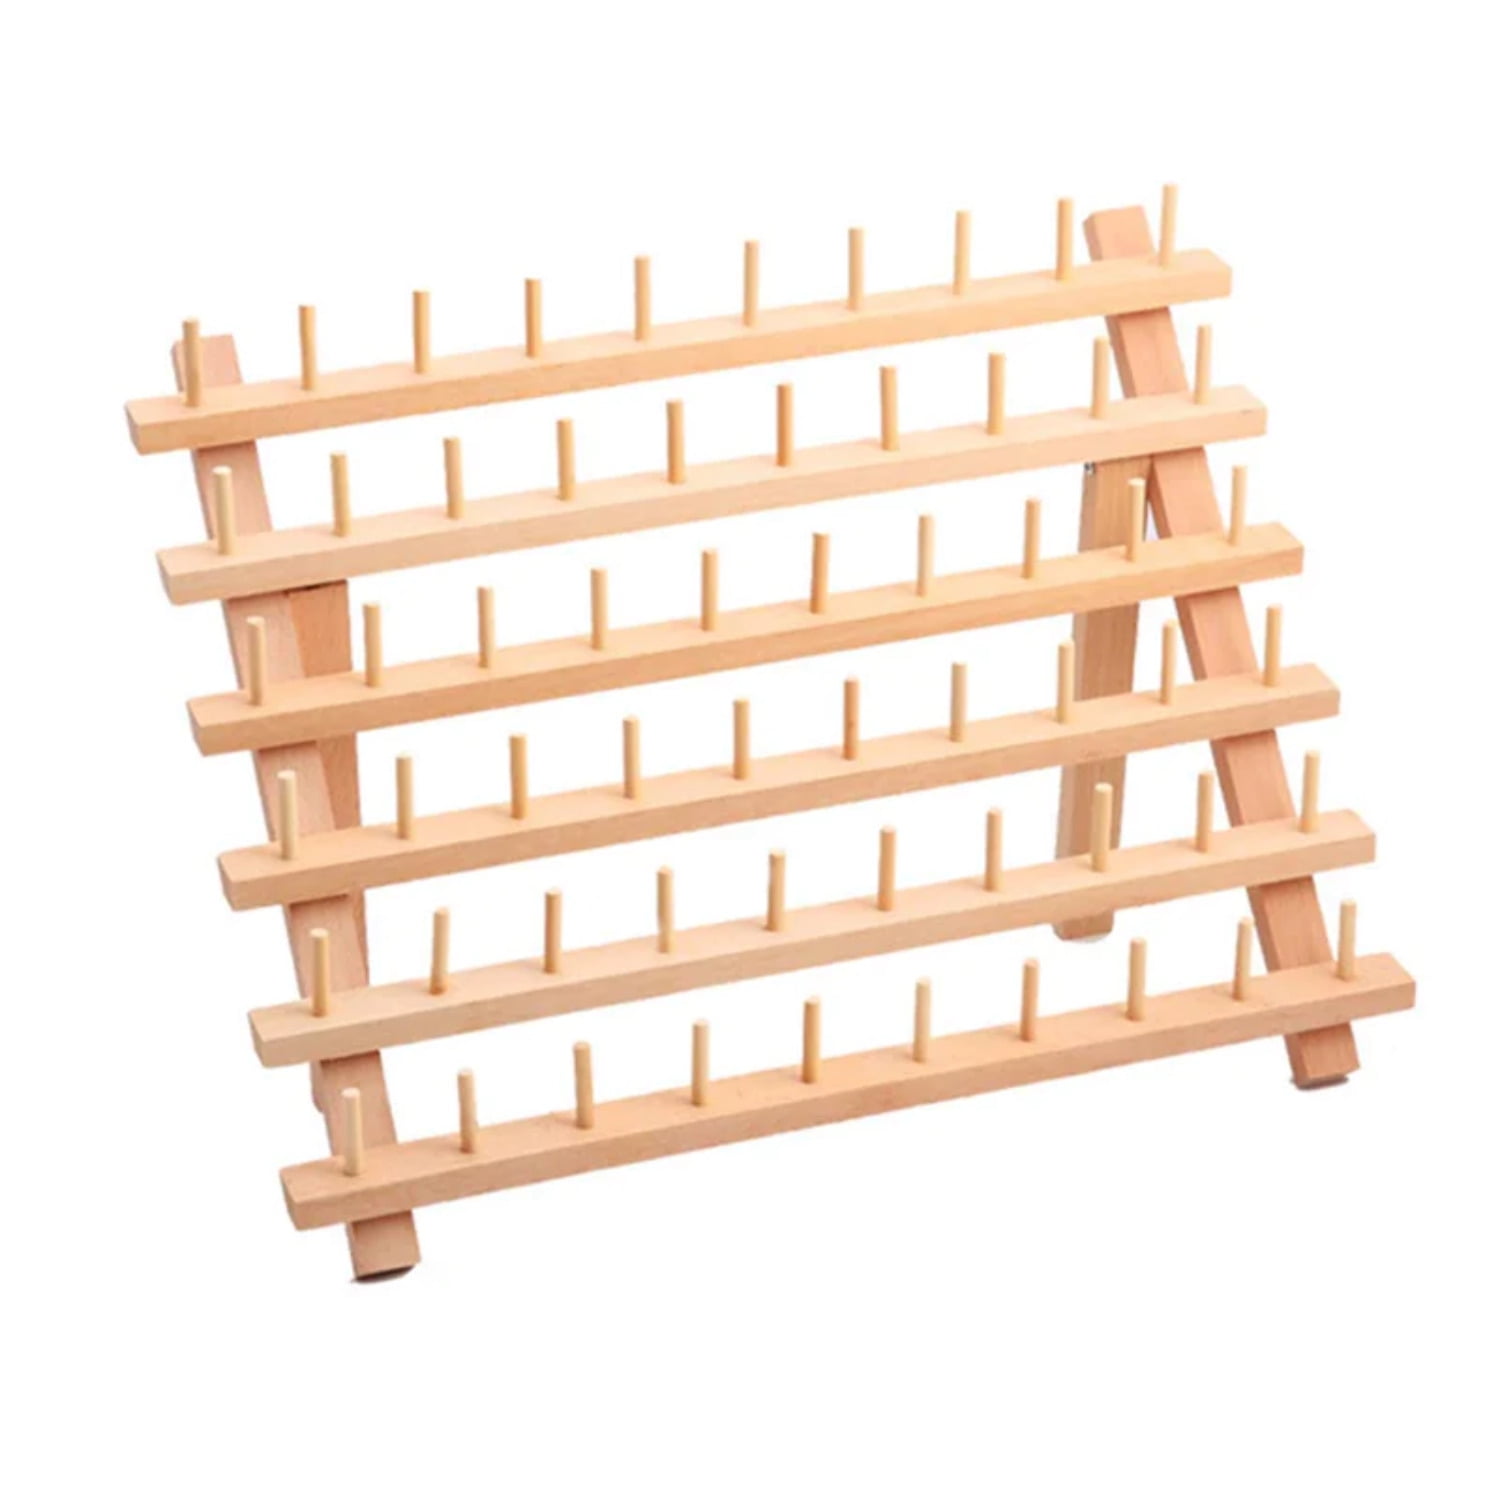 We have Wooden Braiding Hair Rack - Augusta Beauty Outlet